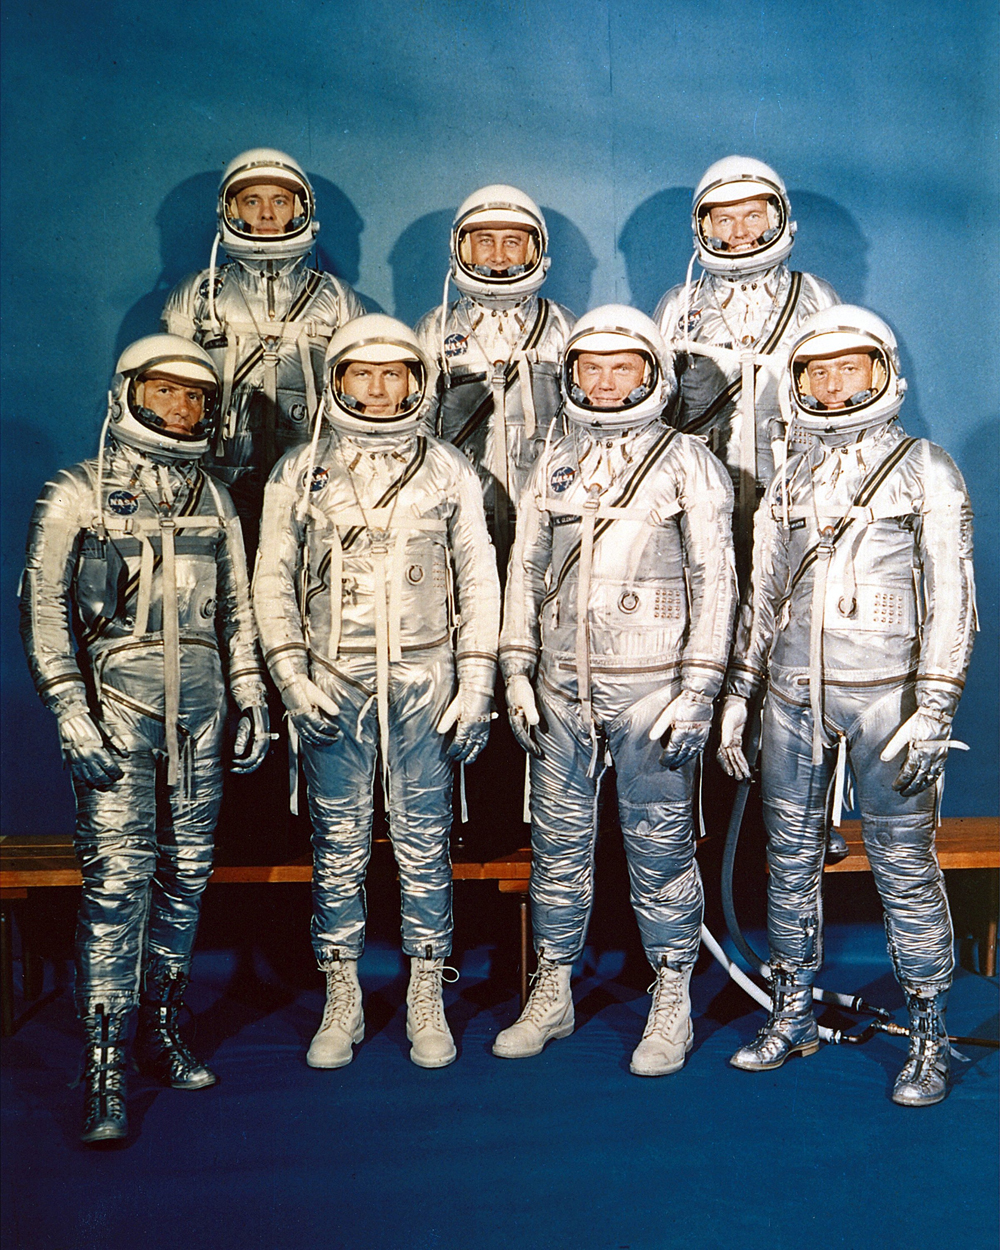 Facts About the Mercury - The First Crewed Spaceflights In The US